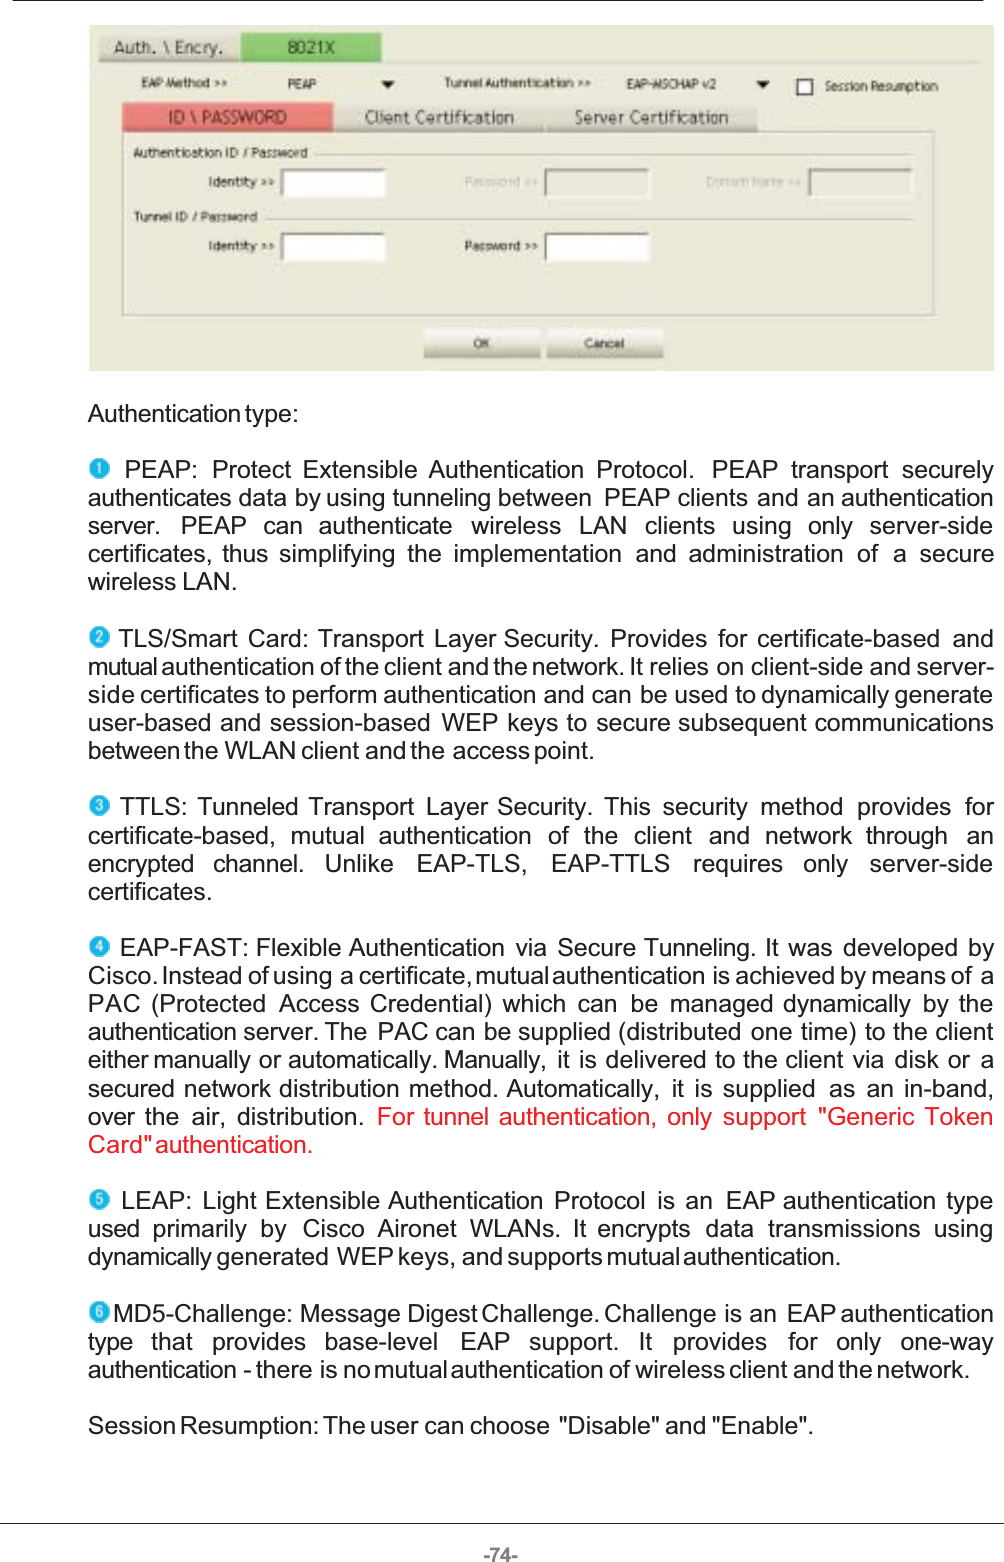 -74- Authentication type:  PEAP:  Protect  Extensible  Authentication  Protocol.  PEAP  transport  securelyauthenticates data by using  tunneling between  PEAP  clients  and  an  authenticationserver.  PEAP  can  authenticate  wireless  LAN  clients  using  only  server-sidecertificates,  thus  simplifying  the  implementation  and  administration  of  a  securewireless LAN.  TLS/Smart  Card:  Transport  Layer  Security.  Provides  for  certificate-based  andmutual authentication of the client and the network. It relies on client-side and server-side certificates to perform authentication and can be used to dynamically generateuser-based  and  session-based  WEP  keys to  secure  subsequent  communicationsbetween the WLAN client and the  access point.  TTLS:  Tunneled  Transport  Layer  Security.  This  security  method  provides  forcertificate-based,  mutual  authentication  of  the  client  and  network  through  anencrypted  channel.  Unlike  EAP-TLS,  EAP-TTLS  requires  only  server-sidecertificates.  EAP-FAST: Flexible  Authentication  via  Secure  Tunneling.  It  was  developed  byCisco. Instead of using a certificate, mutual authentication  is achieved by means of aPAC  (Protected  Access  Credential)  which  can  be  managed  dynamically  by  theauthentication server. The  PAC can be supplied  (distributed  one  time)  to  the  clienteither manually  or  automatically.  Manually,  it  is  delivered to  the  client  via  disk  or  asecured  network  distribution  method.  Automatically,   it  is  supplied  as  an  in-band,over  the  air,  distribution.  For  tunnel  authentication,  only  support  &quot;Generic  TokenCard&quot; authentication.  LEAP:  Light  Extensible  Authentication  Protocol  is  an  EAP  authentication  typeused  primarily  by   Cisco  Aironet  WLANs.  It  encrypts  data  transmissions  usingdynamically generated WEP keys, and supports mutual authentication.  MD5-Challenge:  Message Digest Challenge. Challenge is an EAP authenticationtype  that  provides  base-level   EAP  support.  It  provides  for  only  one-wayauthentication - there is no mutual authentication of wireless client and the network. Session Resumption: The user can choose &quot;Disable&quot; and &quot;Enable&quot;. 